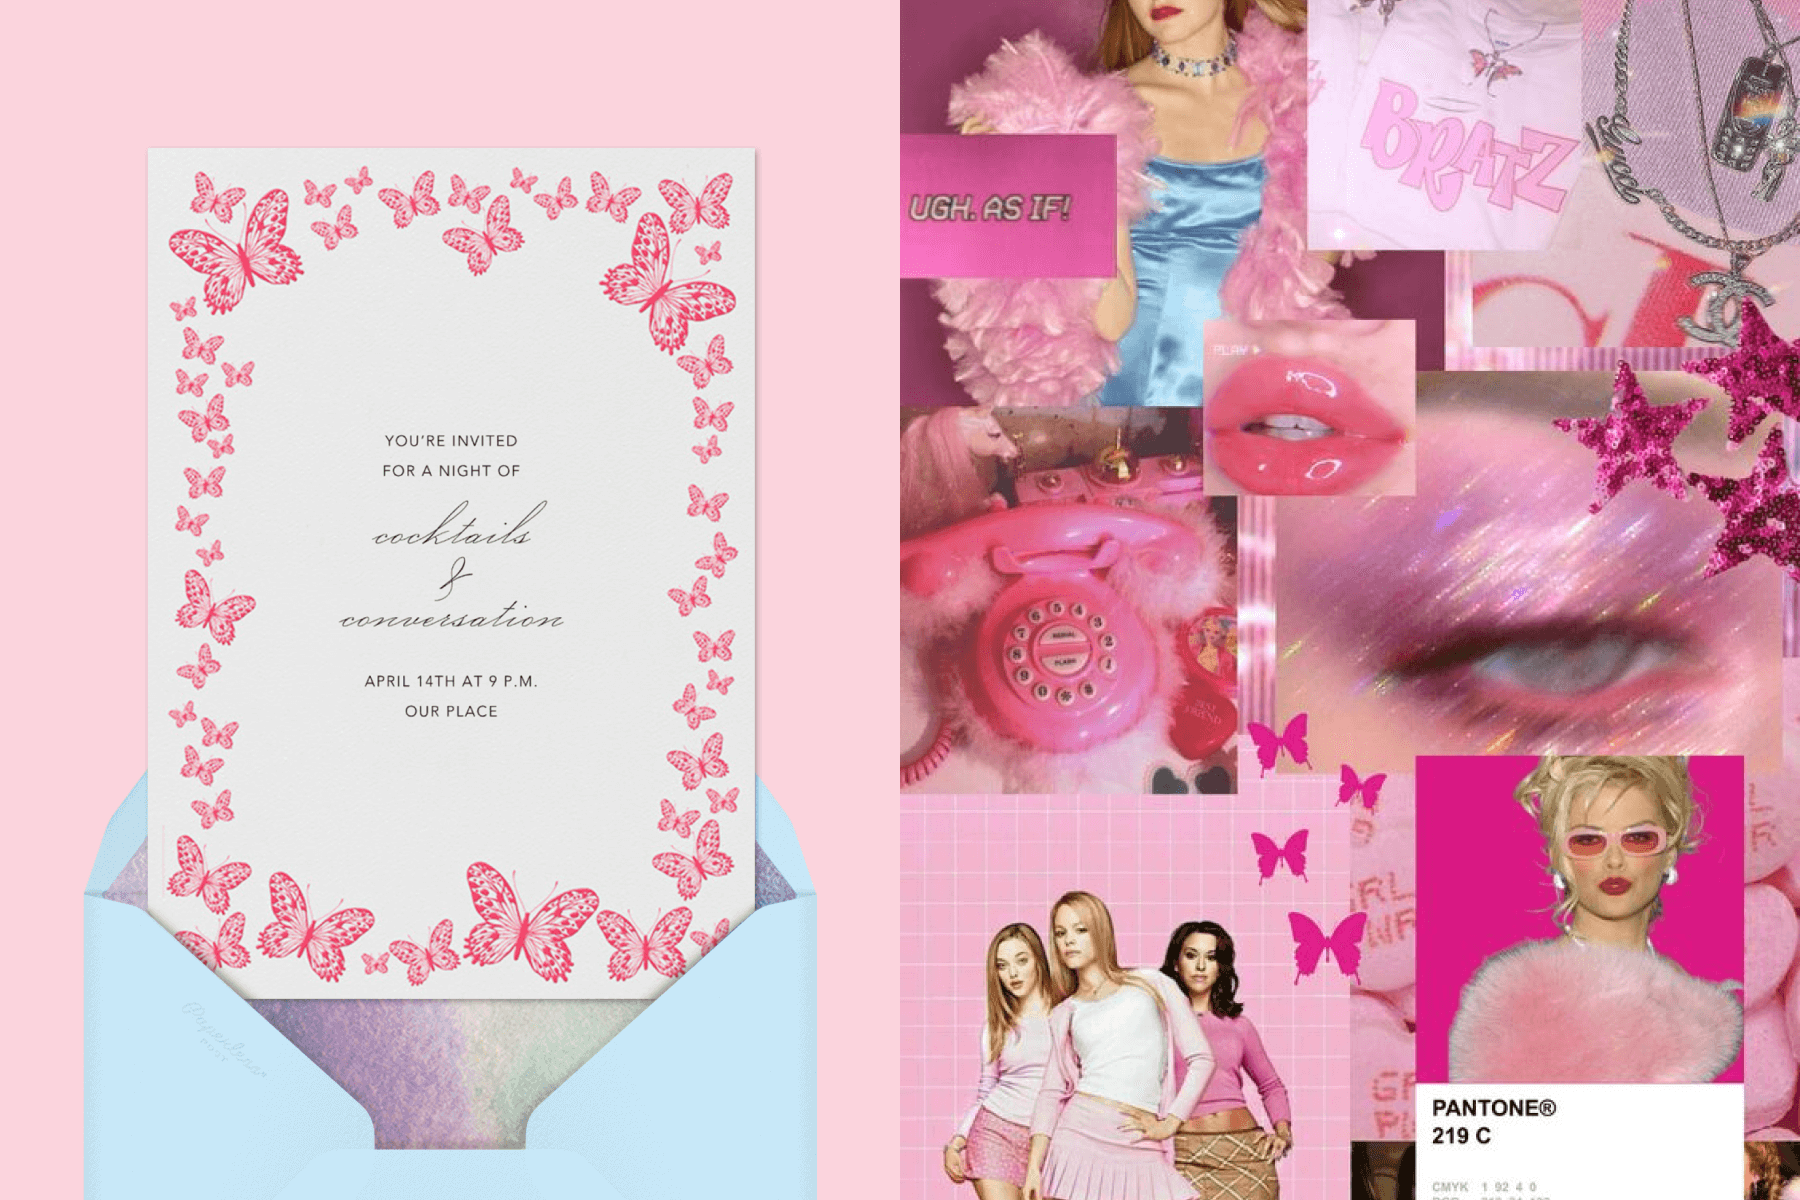 Alt text, left: An invitation with pink butterflies around the border. Right: A pink collage of nostalgic 2000s-related photos and imagery.